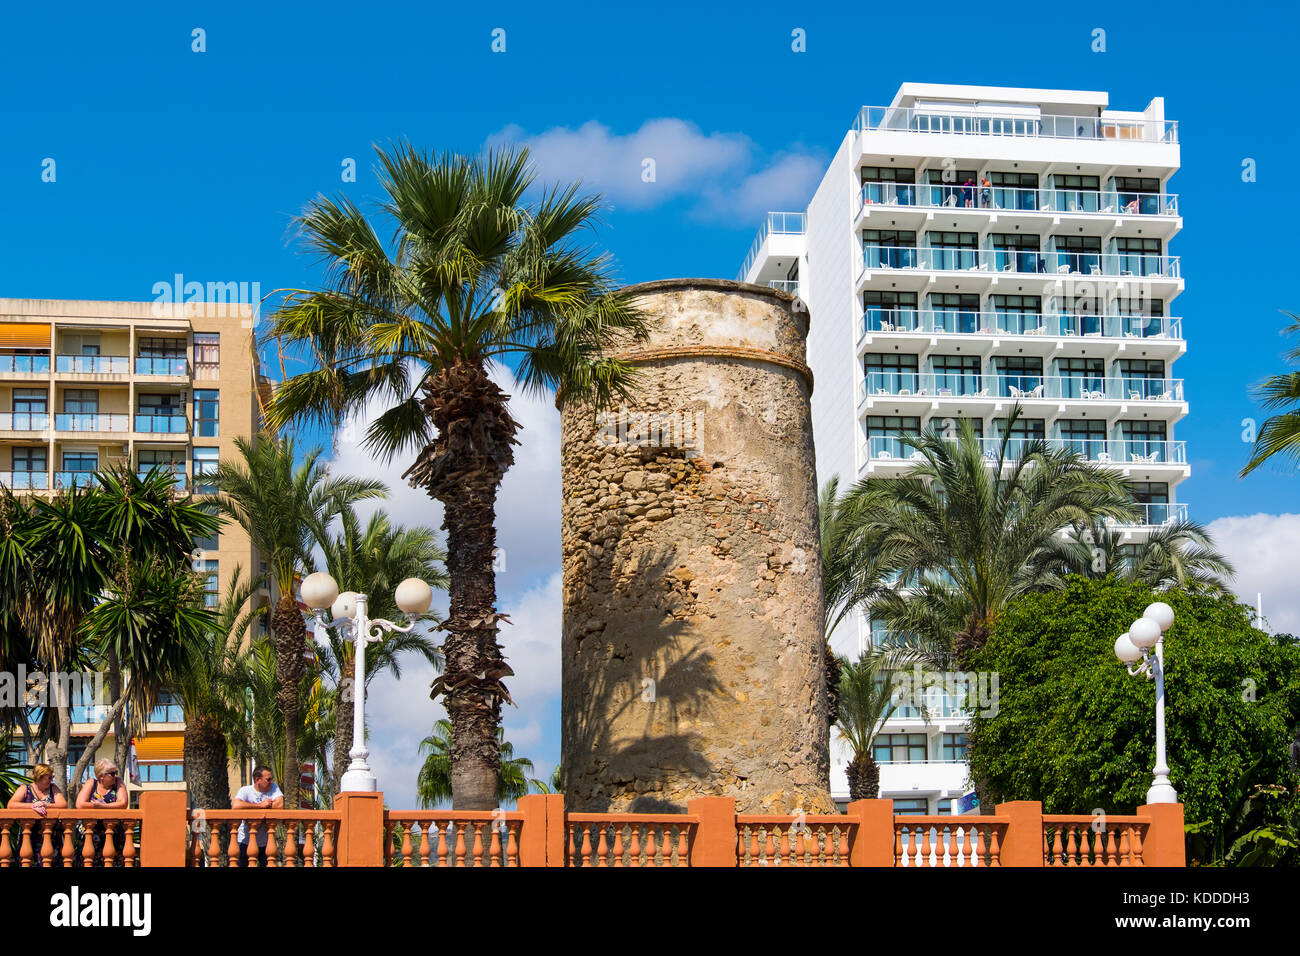 Watch-tower, palms & Hotel, Benalmadena. Málaga province, Costa del Sol, Andalusia. Southern Spain Europe Stock Photo